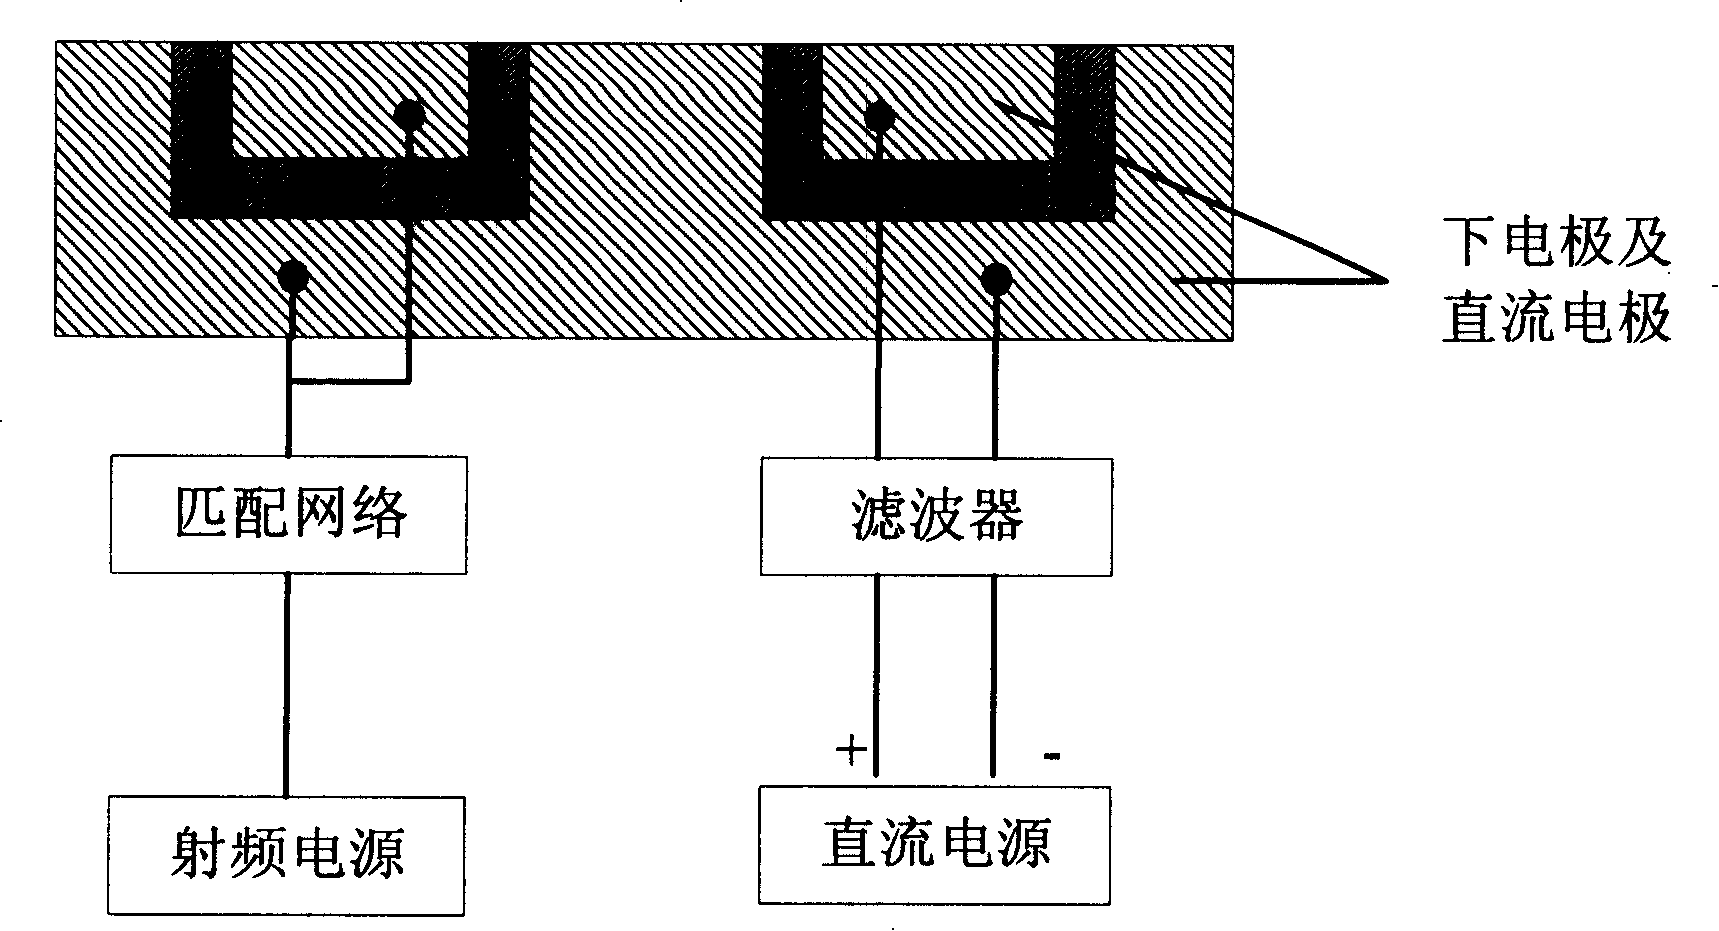 Method and device for controlling wafer DC auto-bias and compensating electrostatic gravitational force between direct current electrode and water